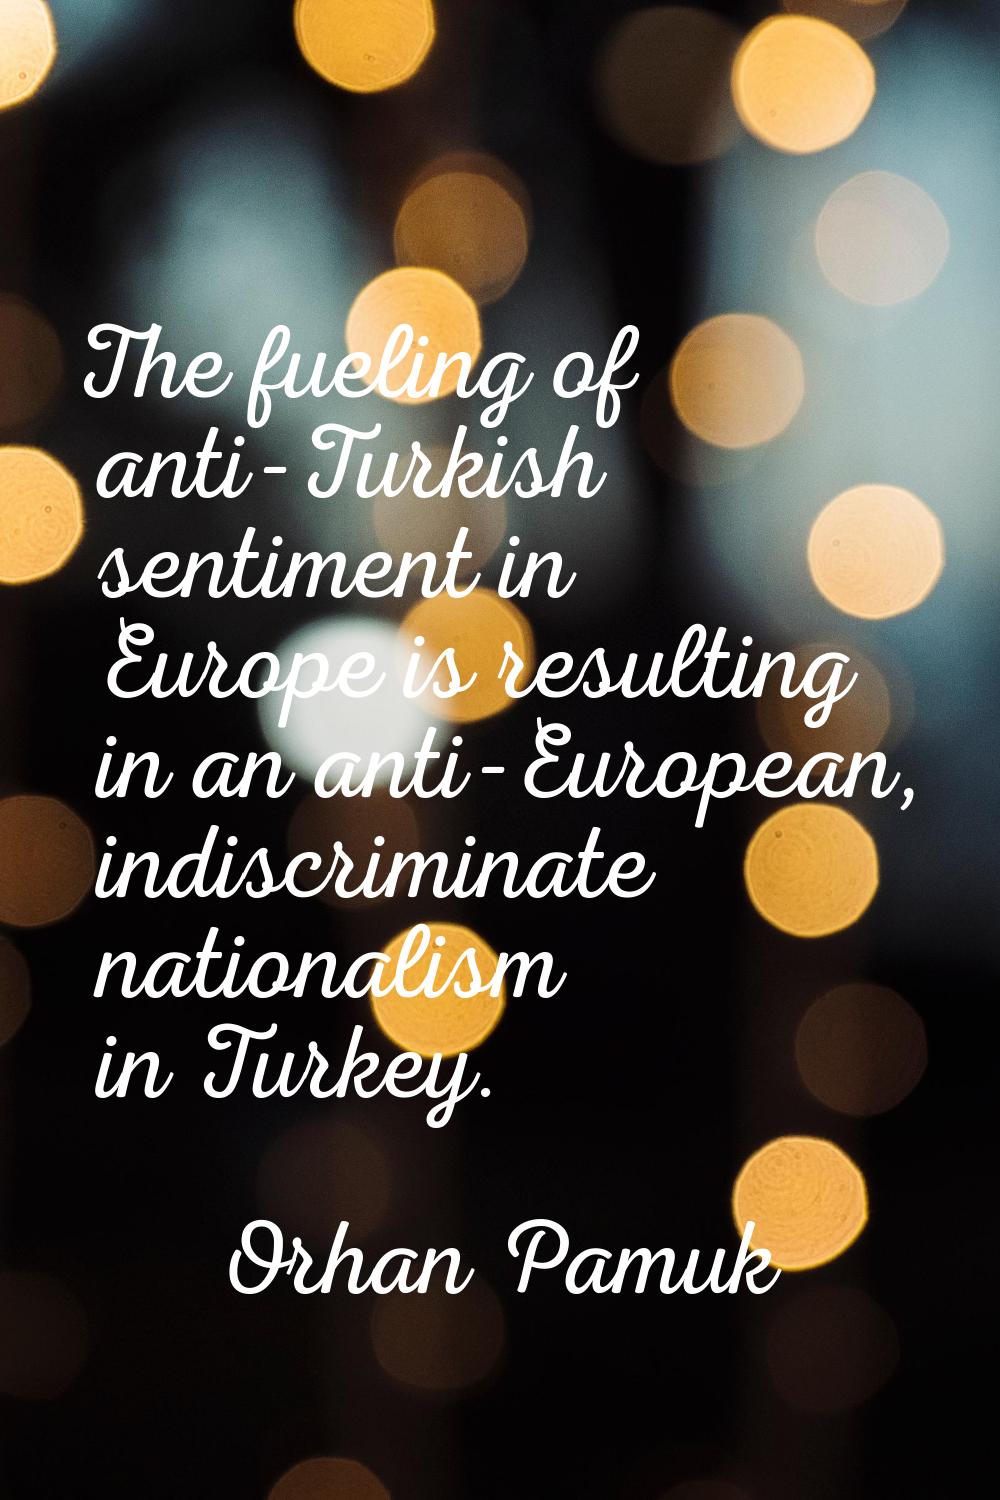 The fueling of anti-Turkish sentiment in Europe is resulting in an anti-European, indiscriminate na